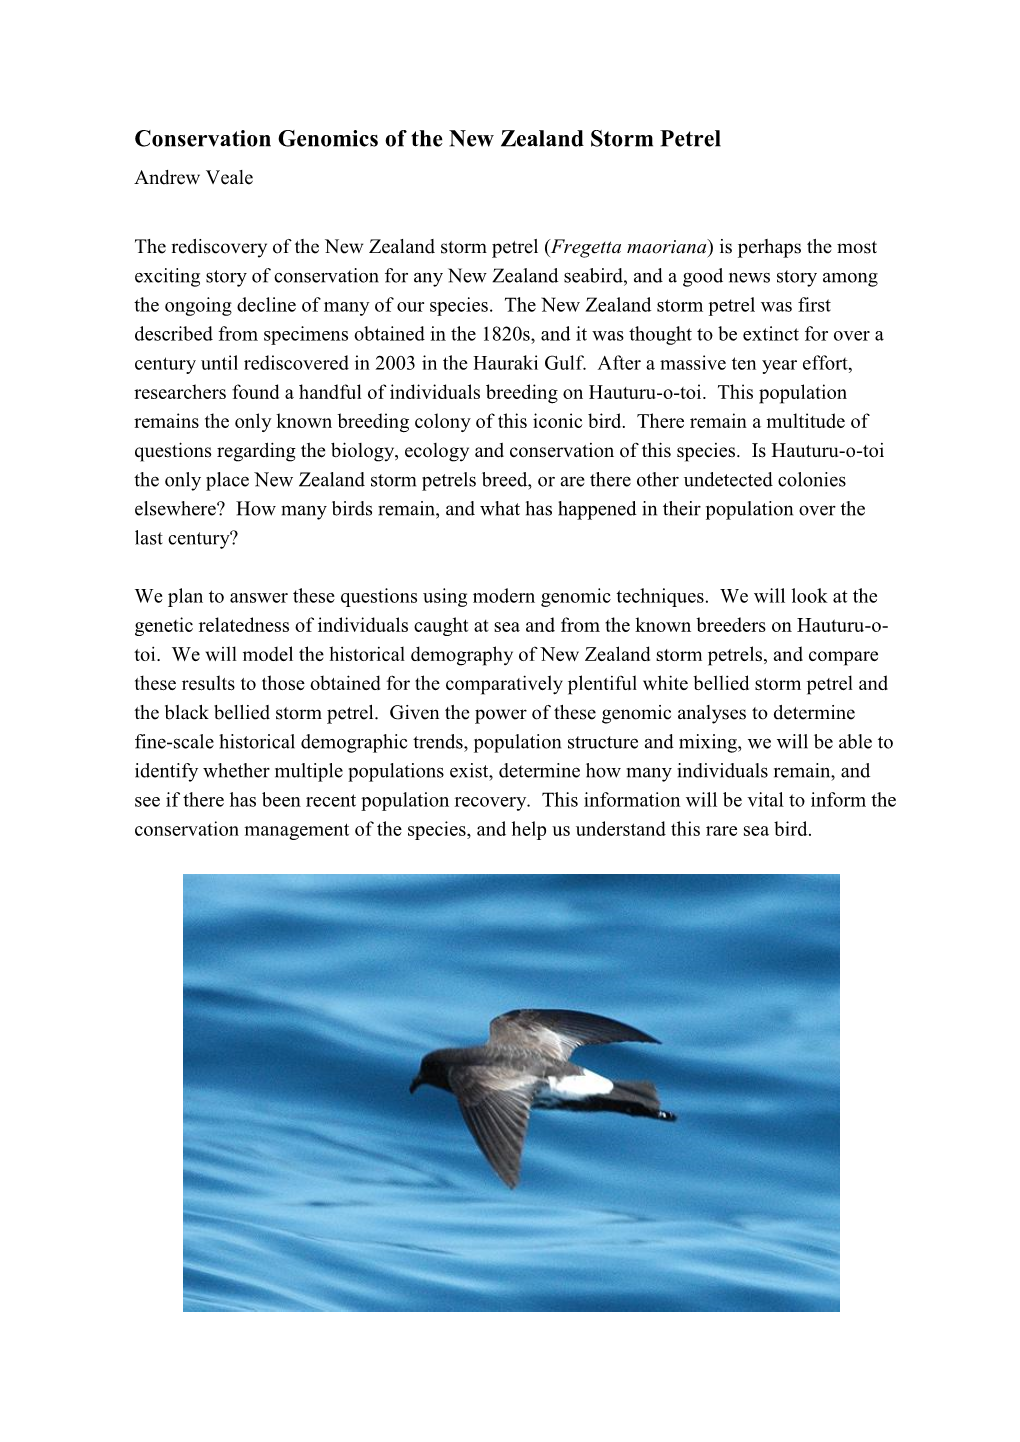 Conservation Genomics of the New Zealand Storm Petrel Andrew Veale